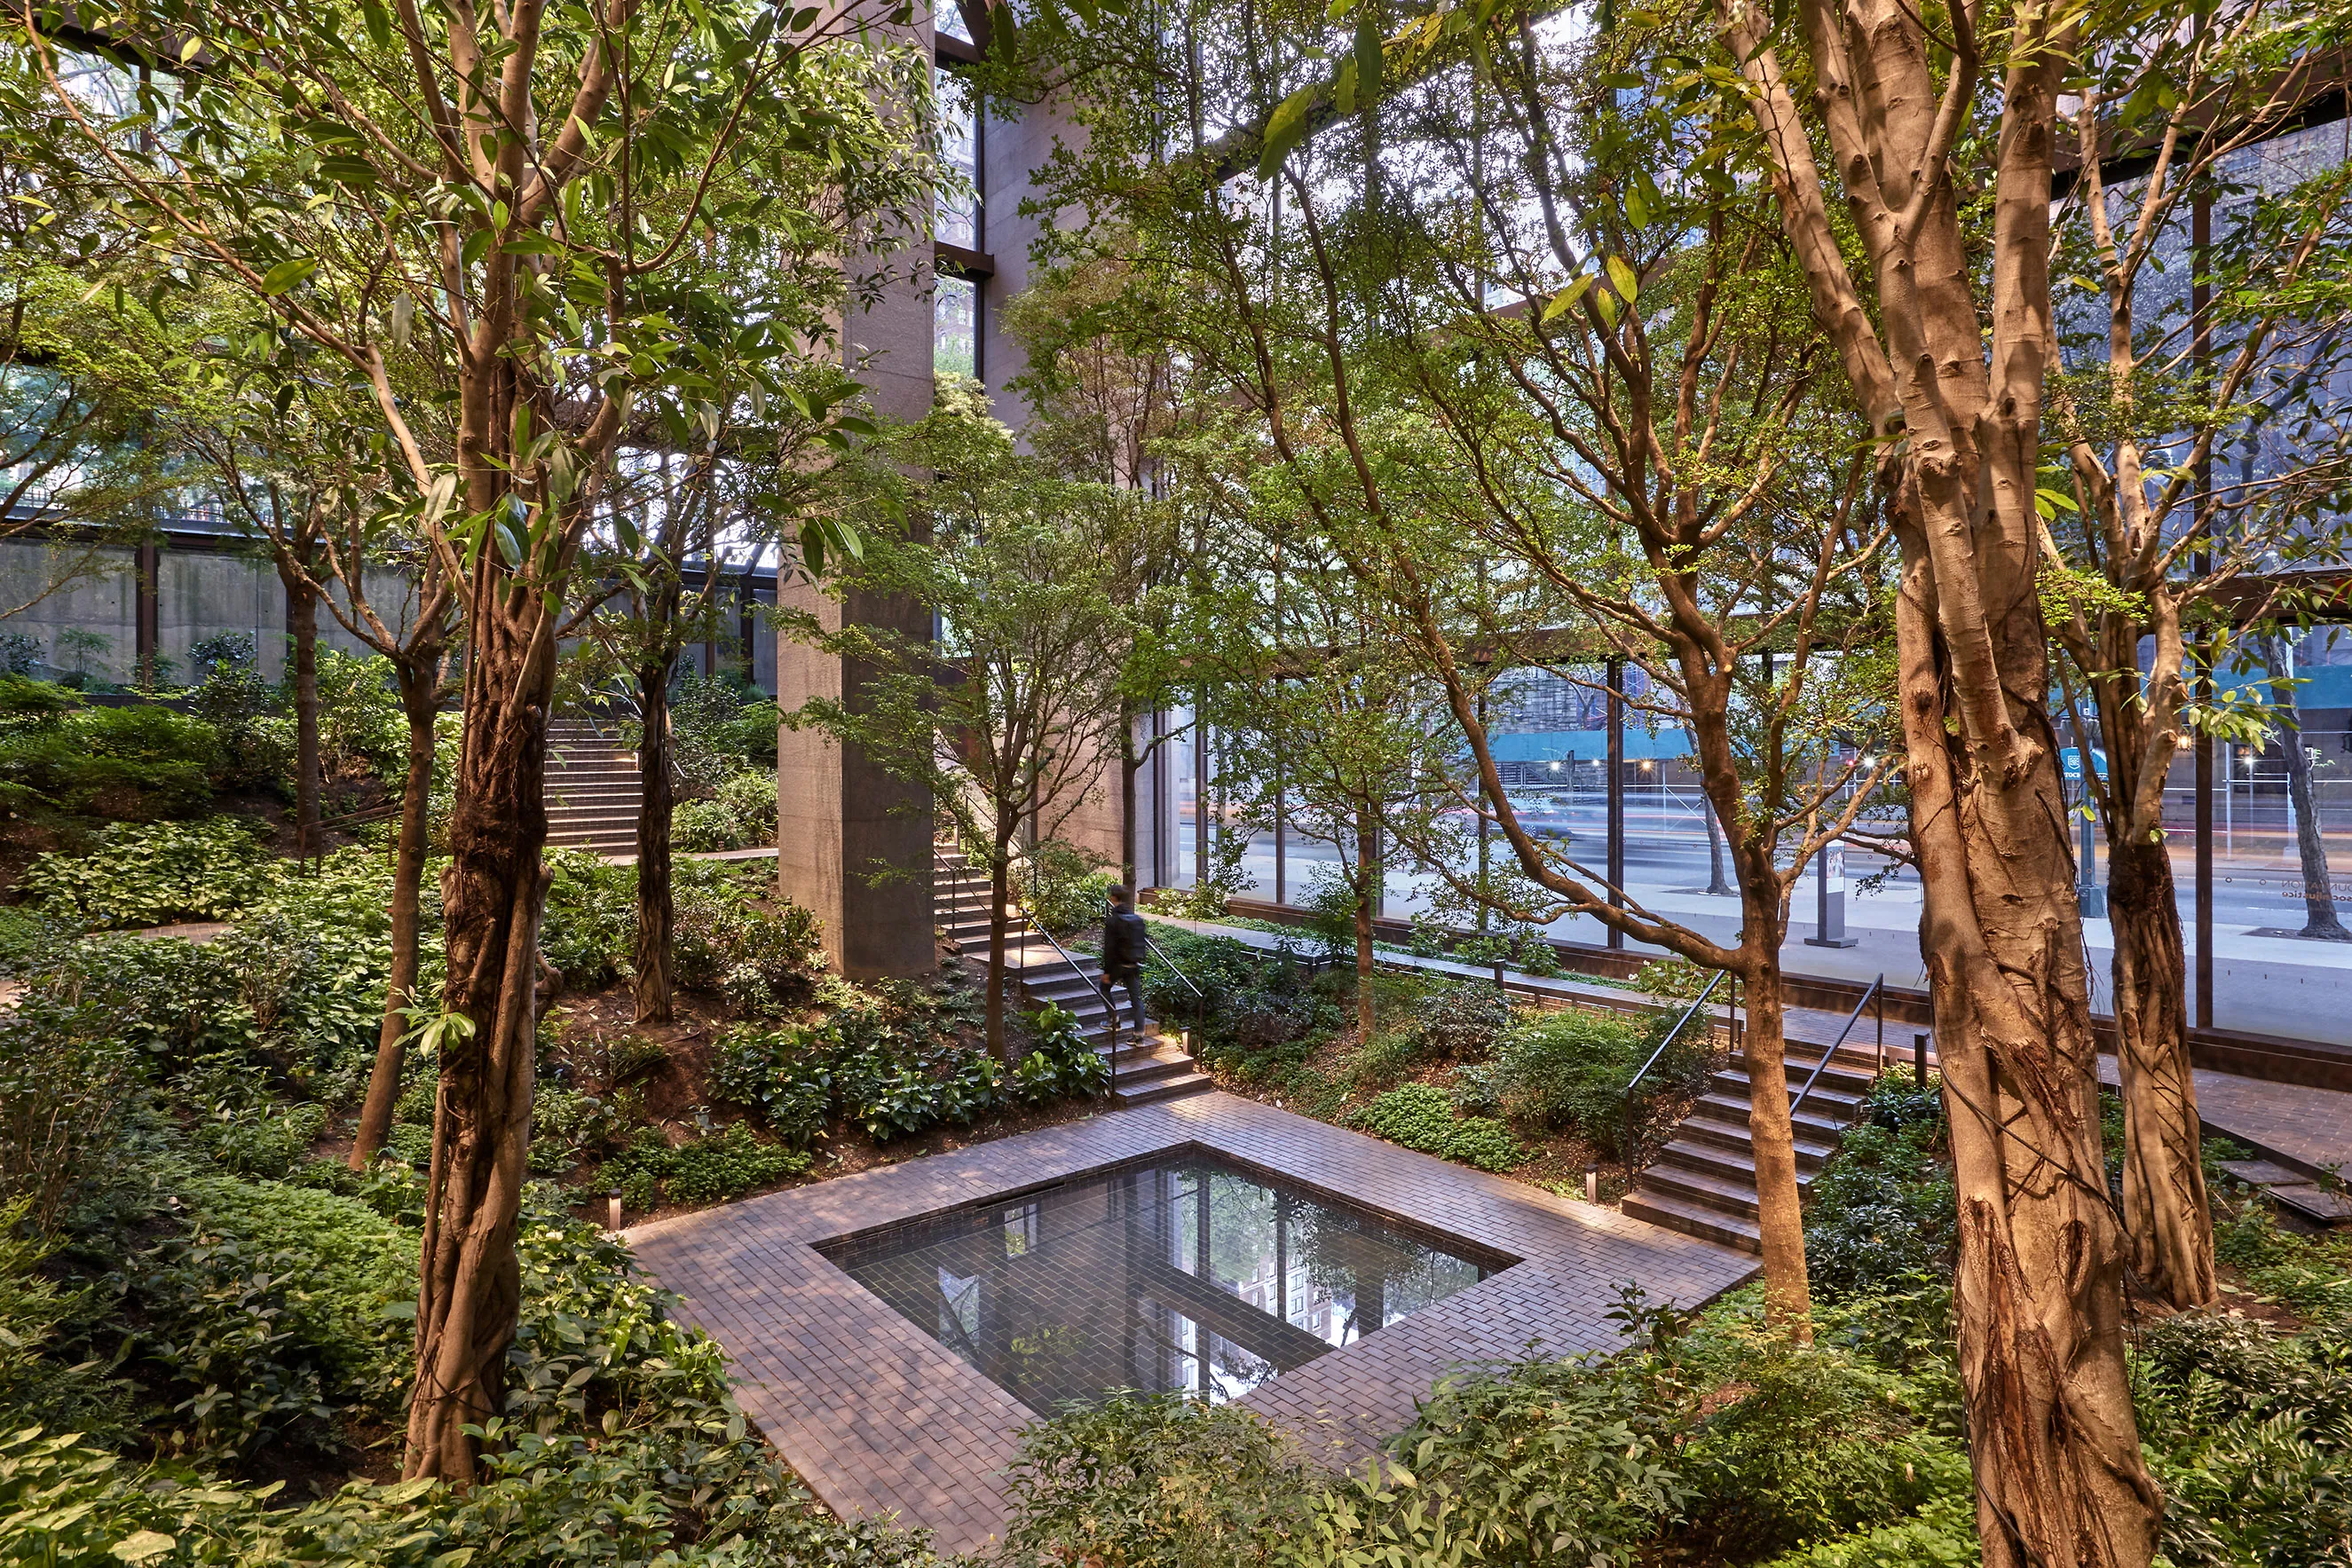 Atrium of a building filled with lush trees and vibrant plants, creating a serene and natural ambiance.